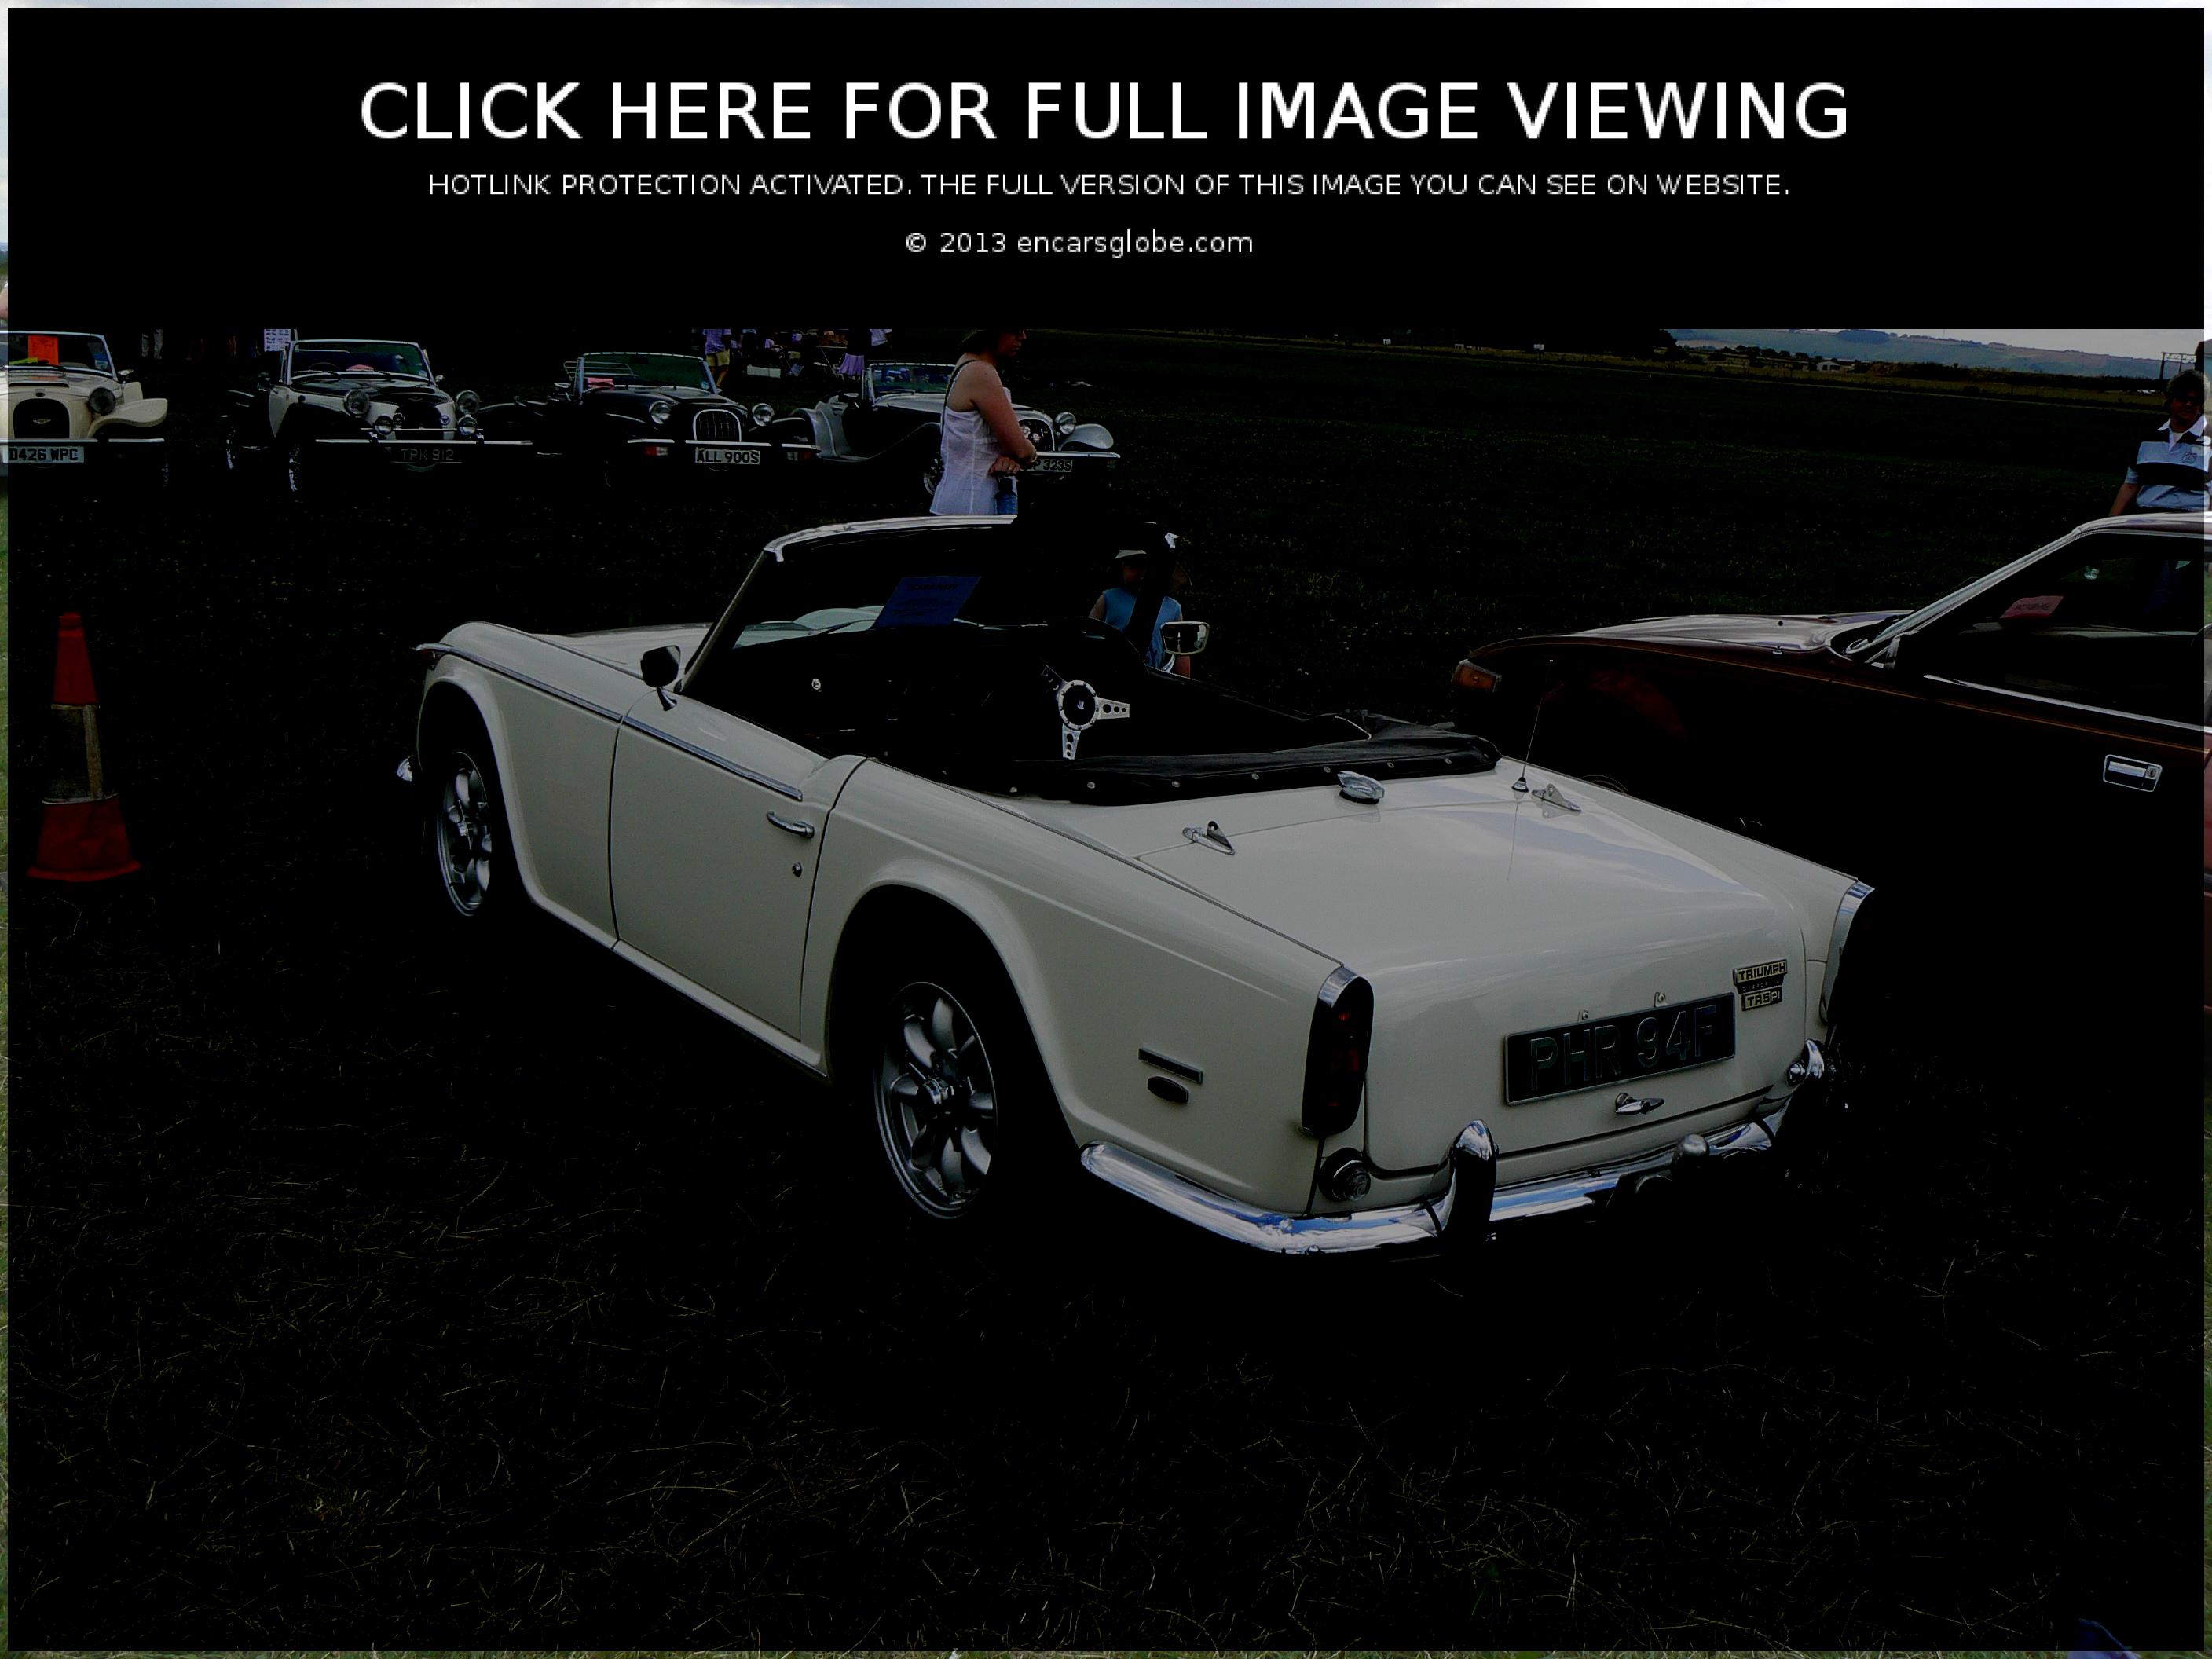 Triumph TR5 Pi: Photo gallery, complete information about model ...